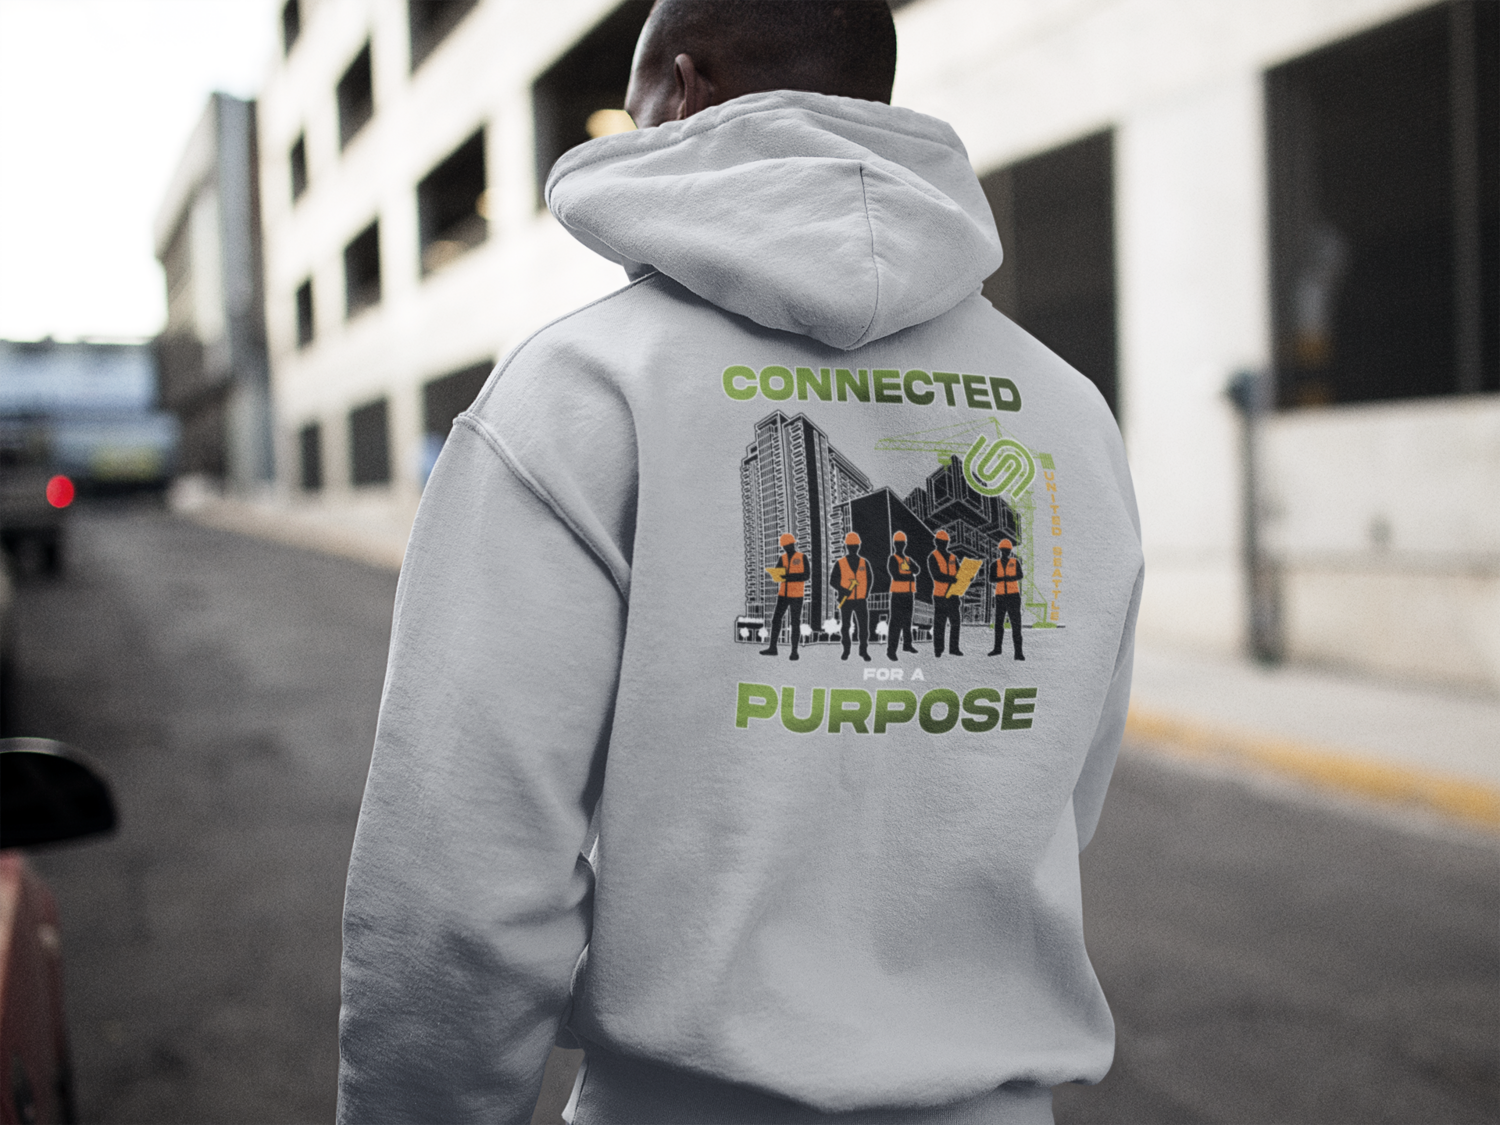 Workforce Unity: 'Connected for a Purpose' Hoodie